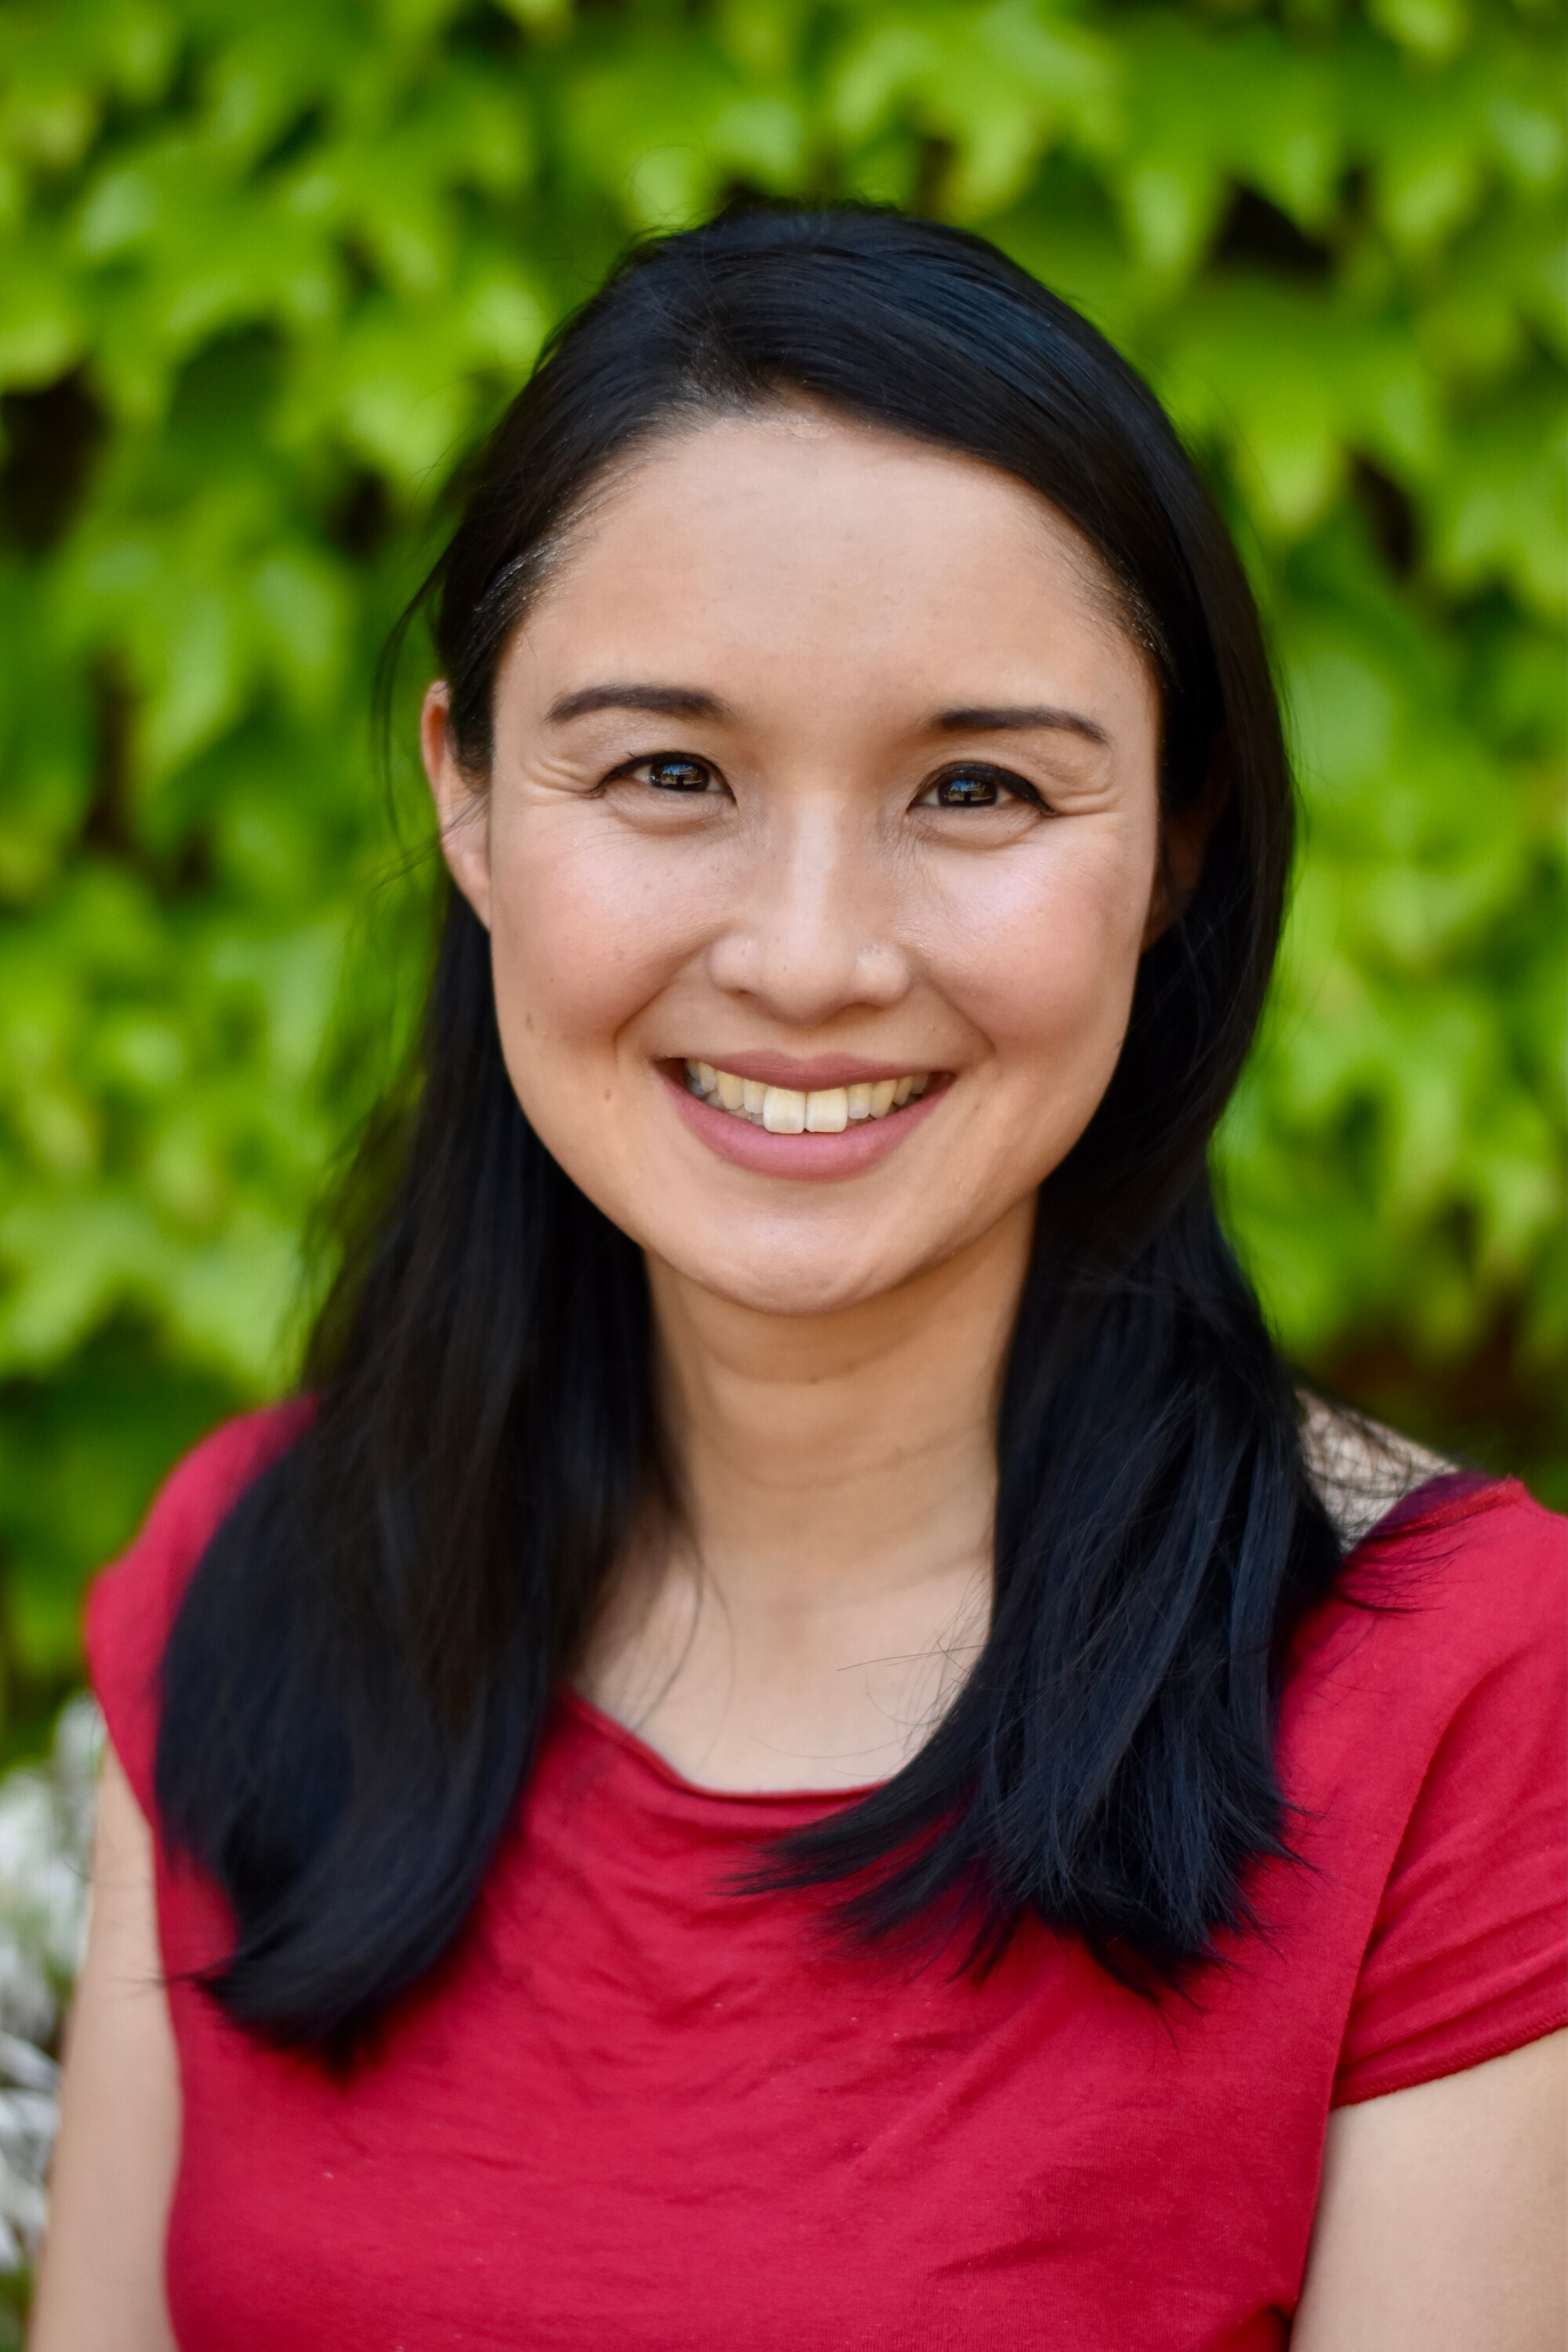 An Asian Australian woman in her early 40s, with long black hair and wearing a red blouse, smiles at the camera.